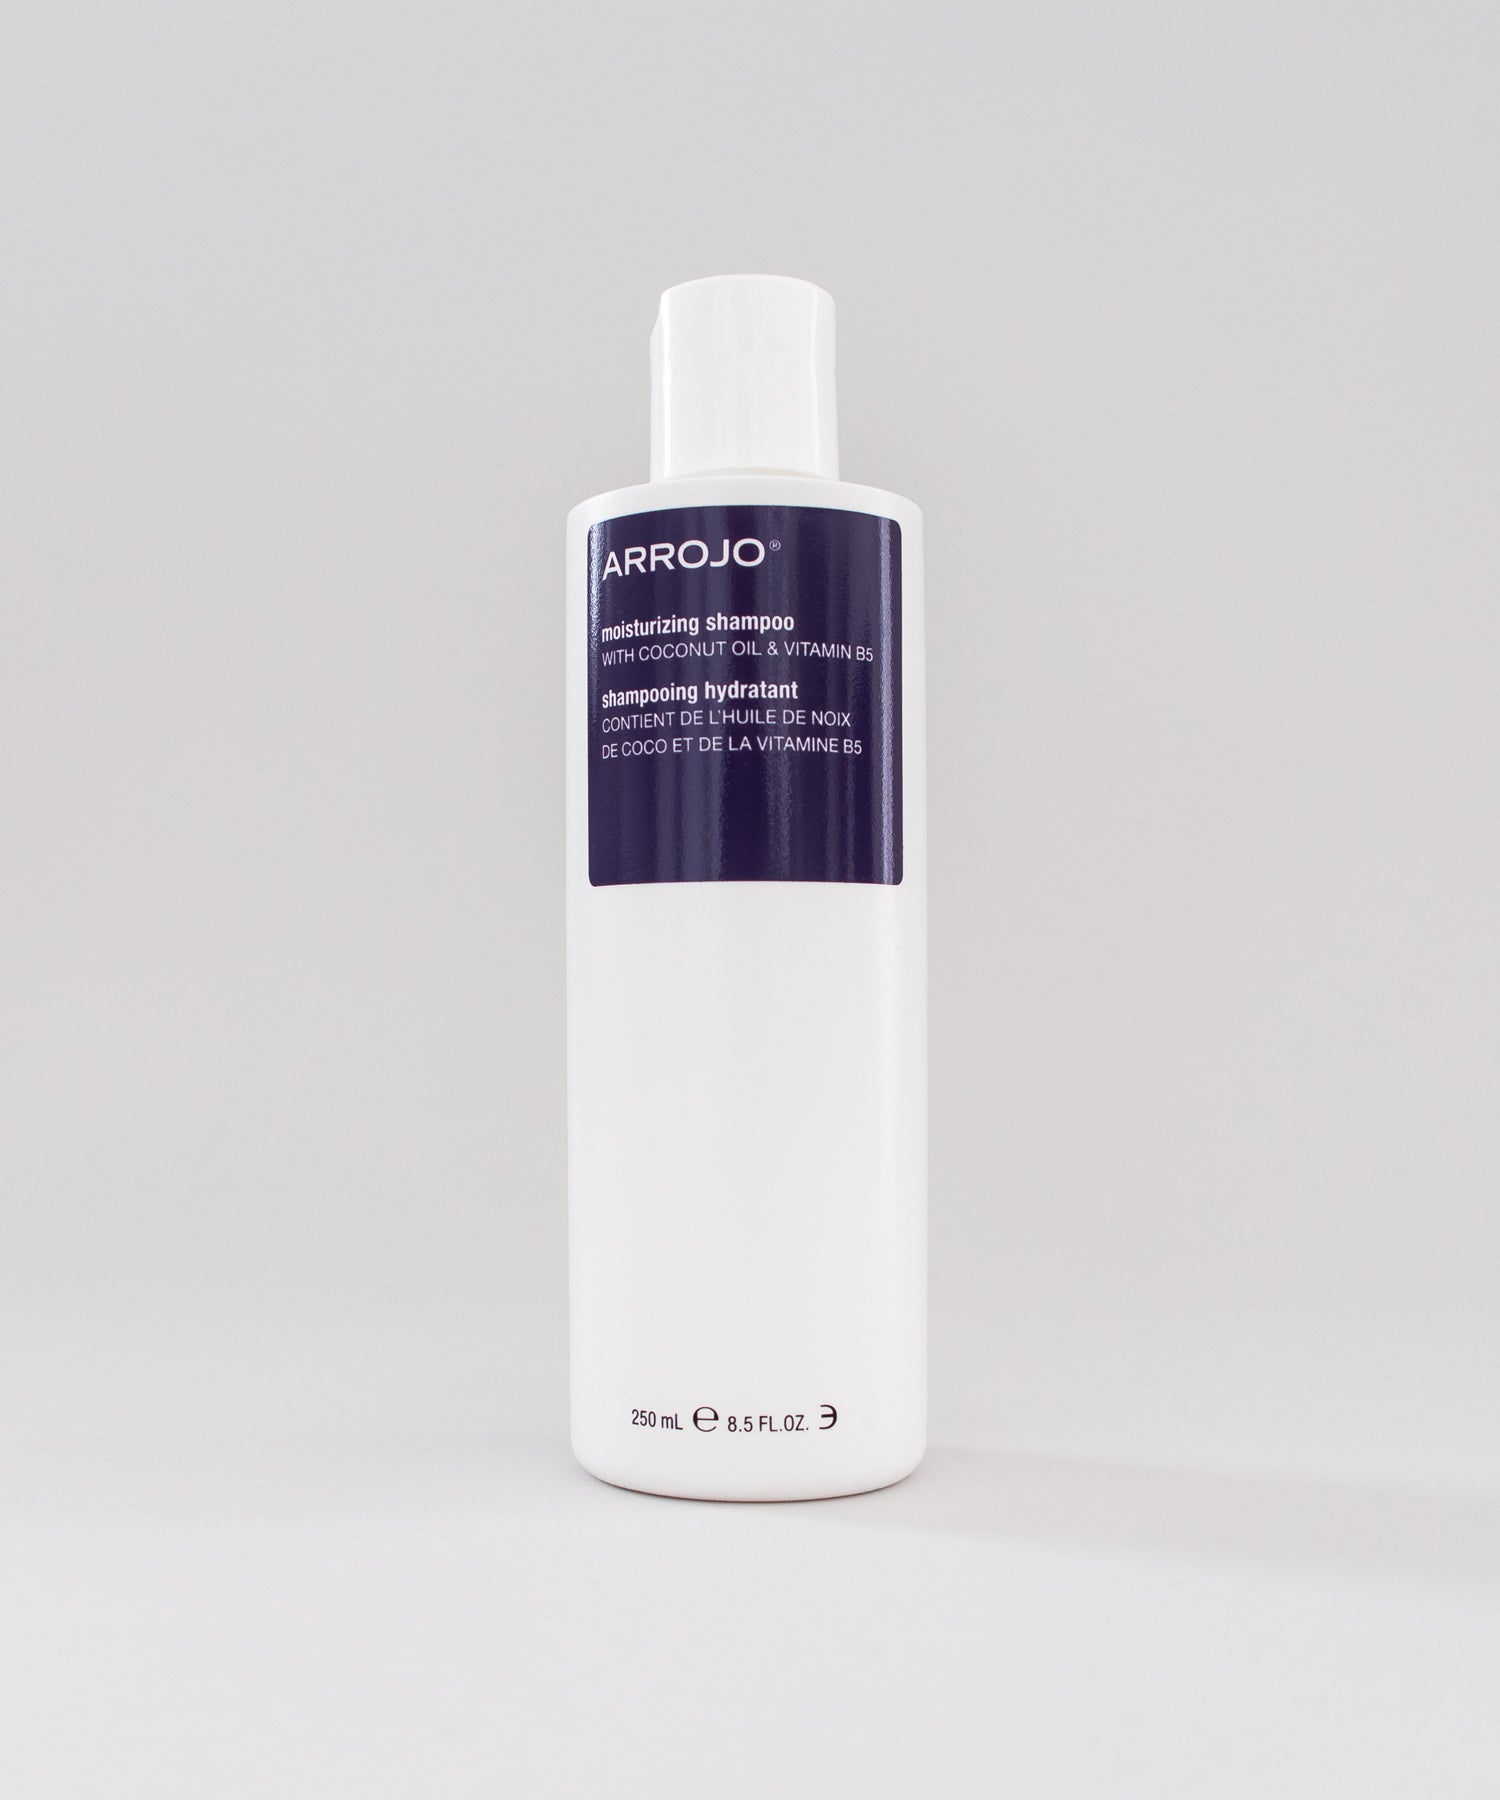 Arrojo moisturizing shampoo is a luxurious, vitamin-packed moisture-rich cleanser that gently cleanses, hydrates, and repairs